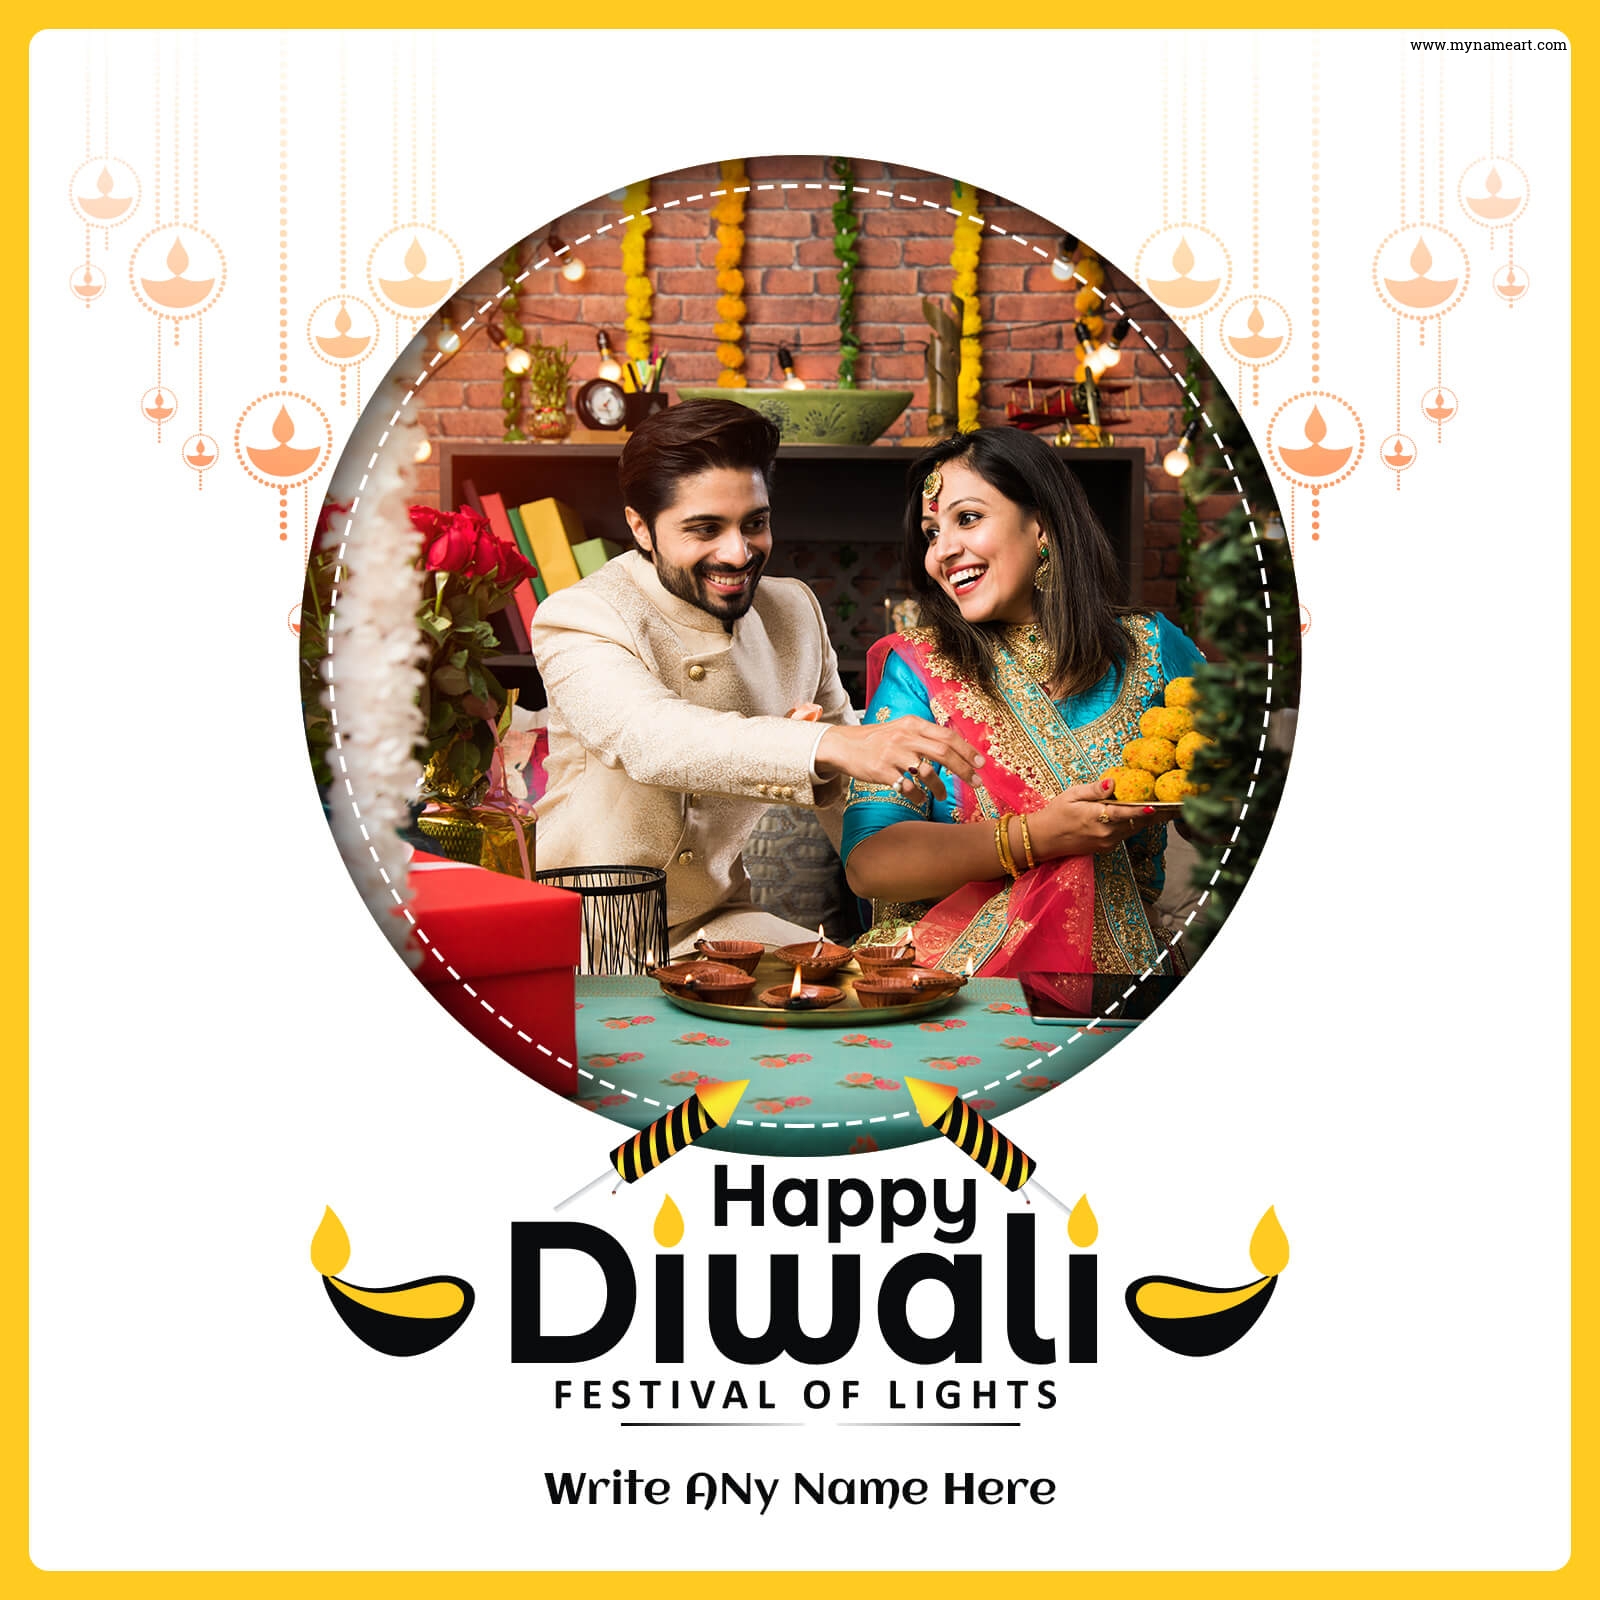 Design Diwali Story Image With Photo Online At MyNameArt